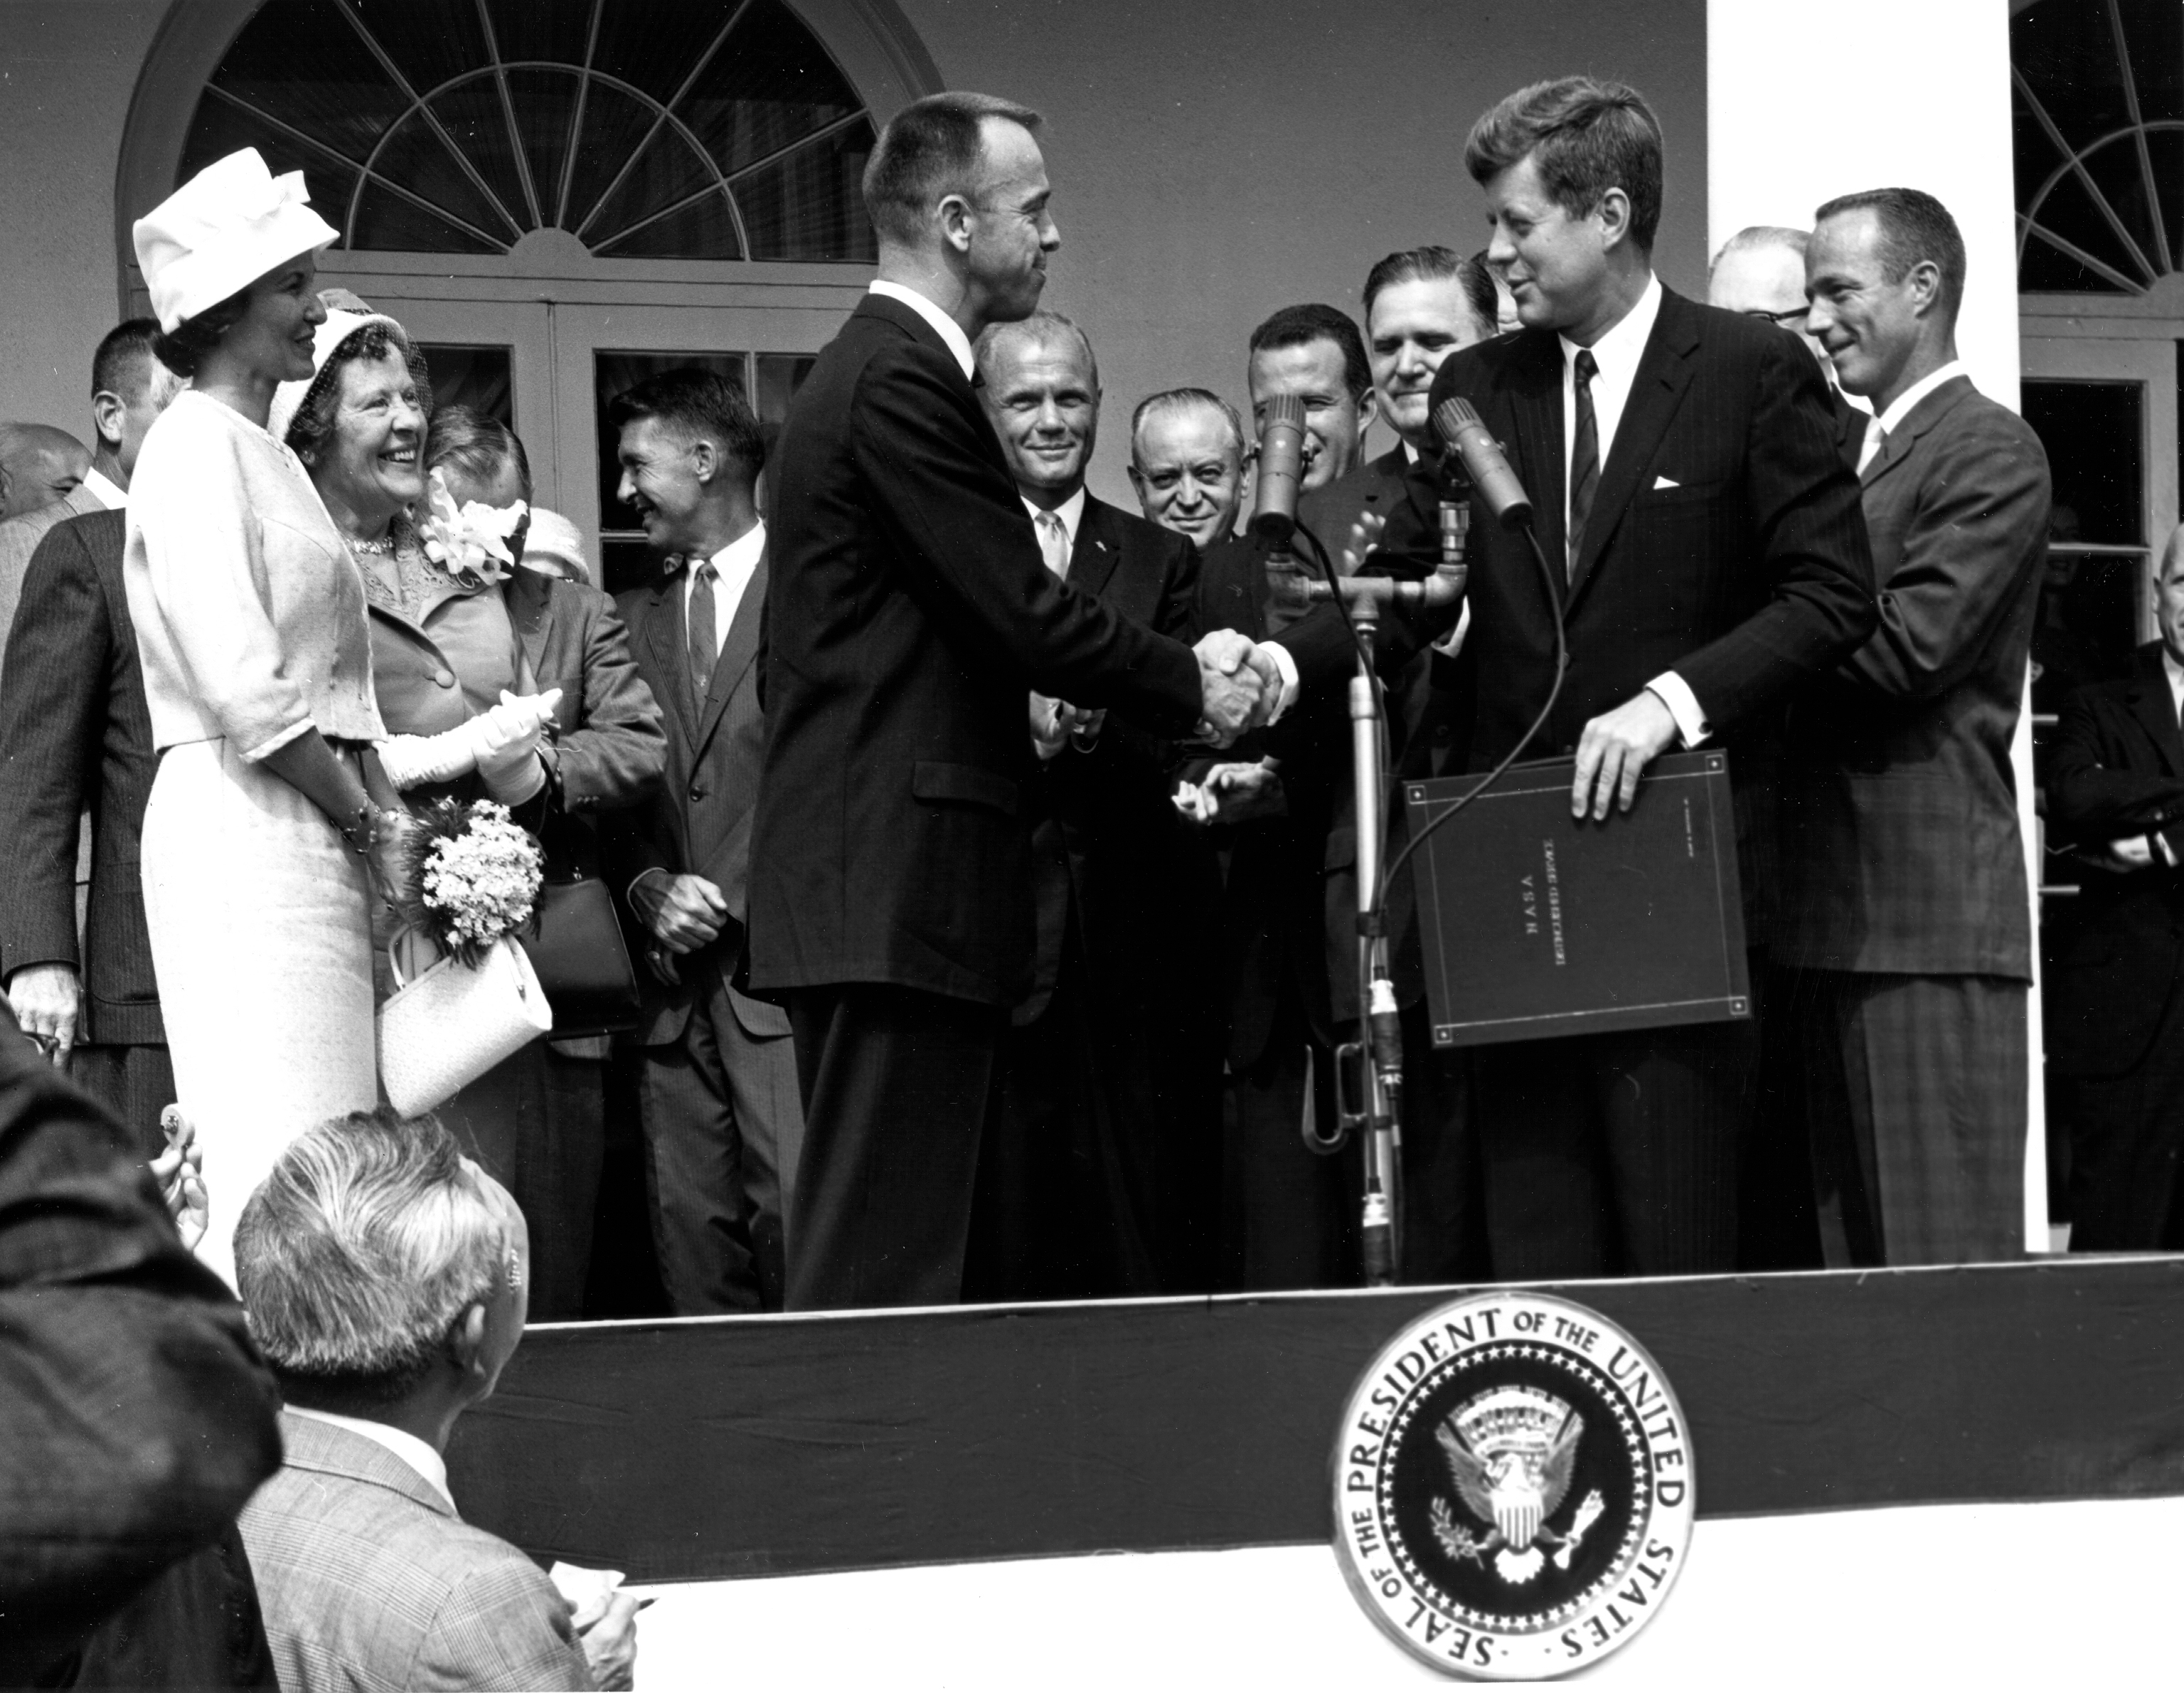 Kennedy and Shepard in Washington D.C. (9460624334) - President John F. Kennedy congratulates astronaut Alan B. Shepard, Jr., the first American in space, on his historic May 5th, 1961 ride in the Freedom 7 spacecraft and presents him with the NASA Distinguished Service Award. The ceremony took place on the White House lawn. Shepard's wife, Louise (left in white dress and hat), and his mother were in attendance as well as the other six Mercury astronauts and NASA officals, some visible in the background.                                                            

Image # : 1961ADM-13